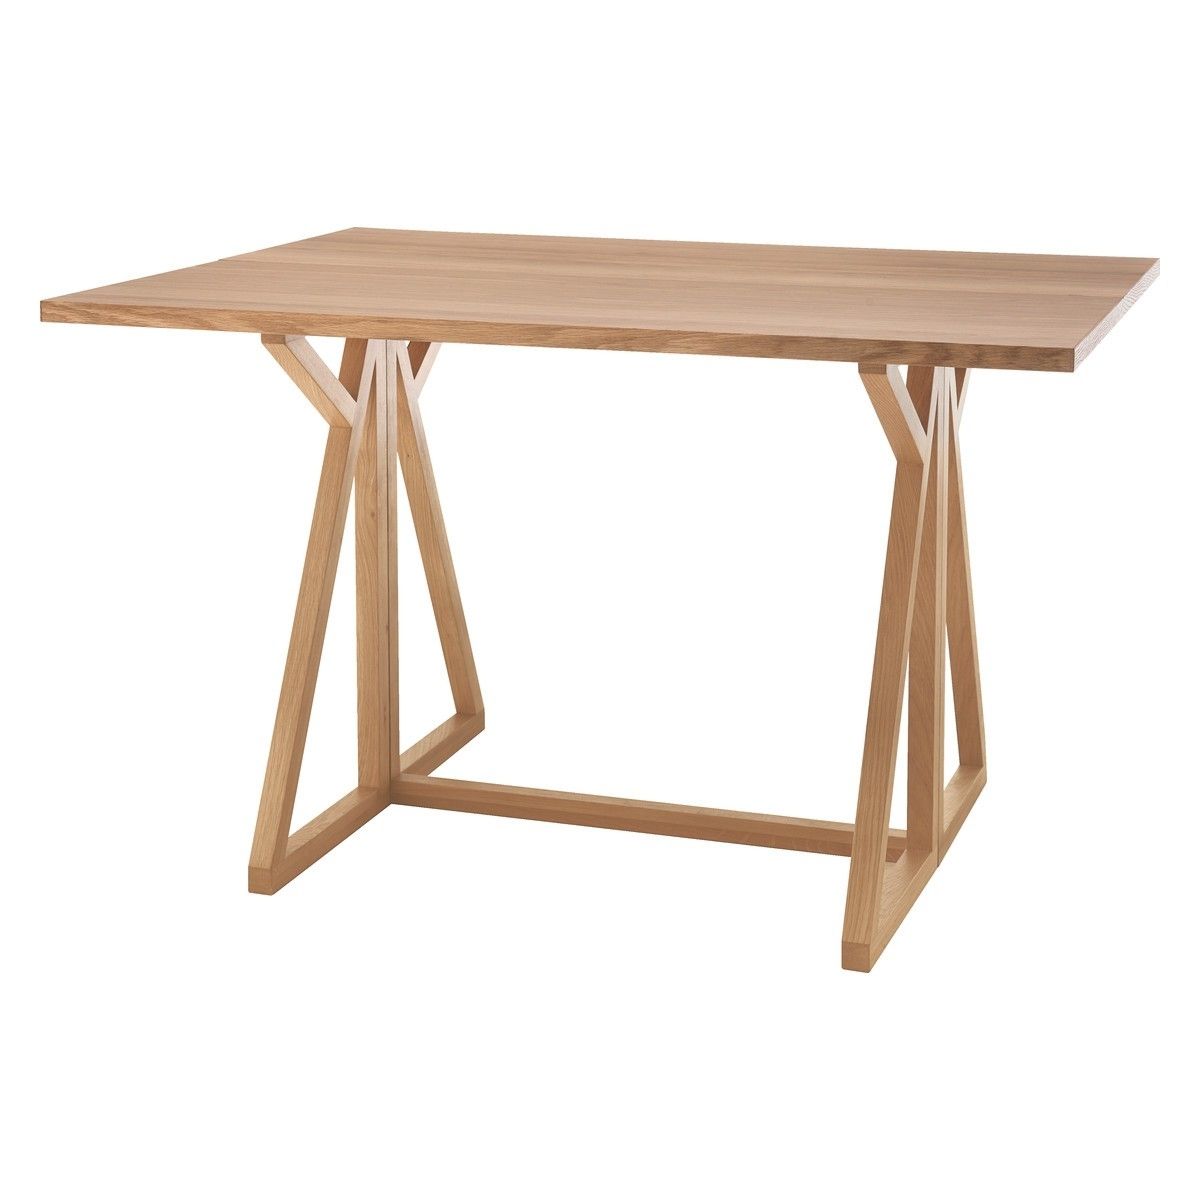 Buy Now At Habitat Uk With Most Popular 4 Seat Dining Tables (View 9 of 25)